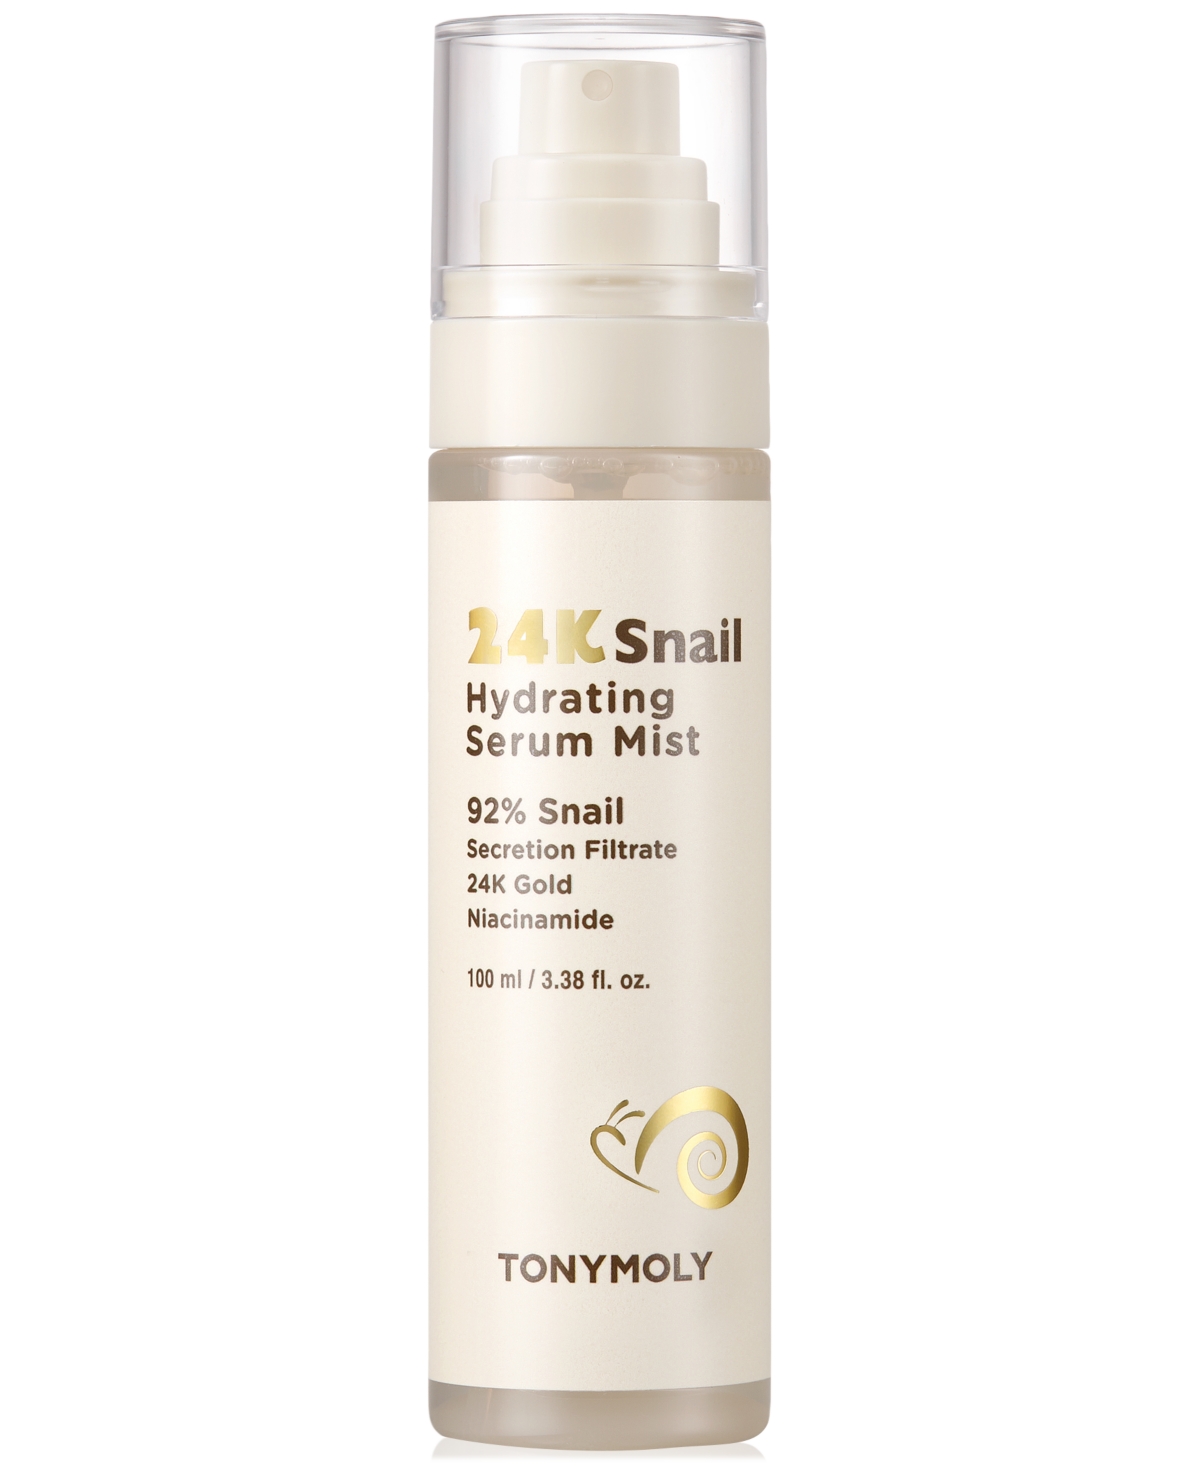 Tonymoly 24k Snail Hydrating Serum Mist In No Color